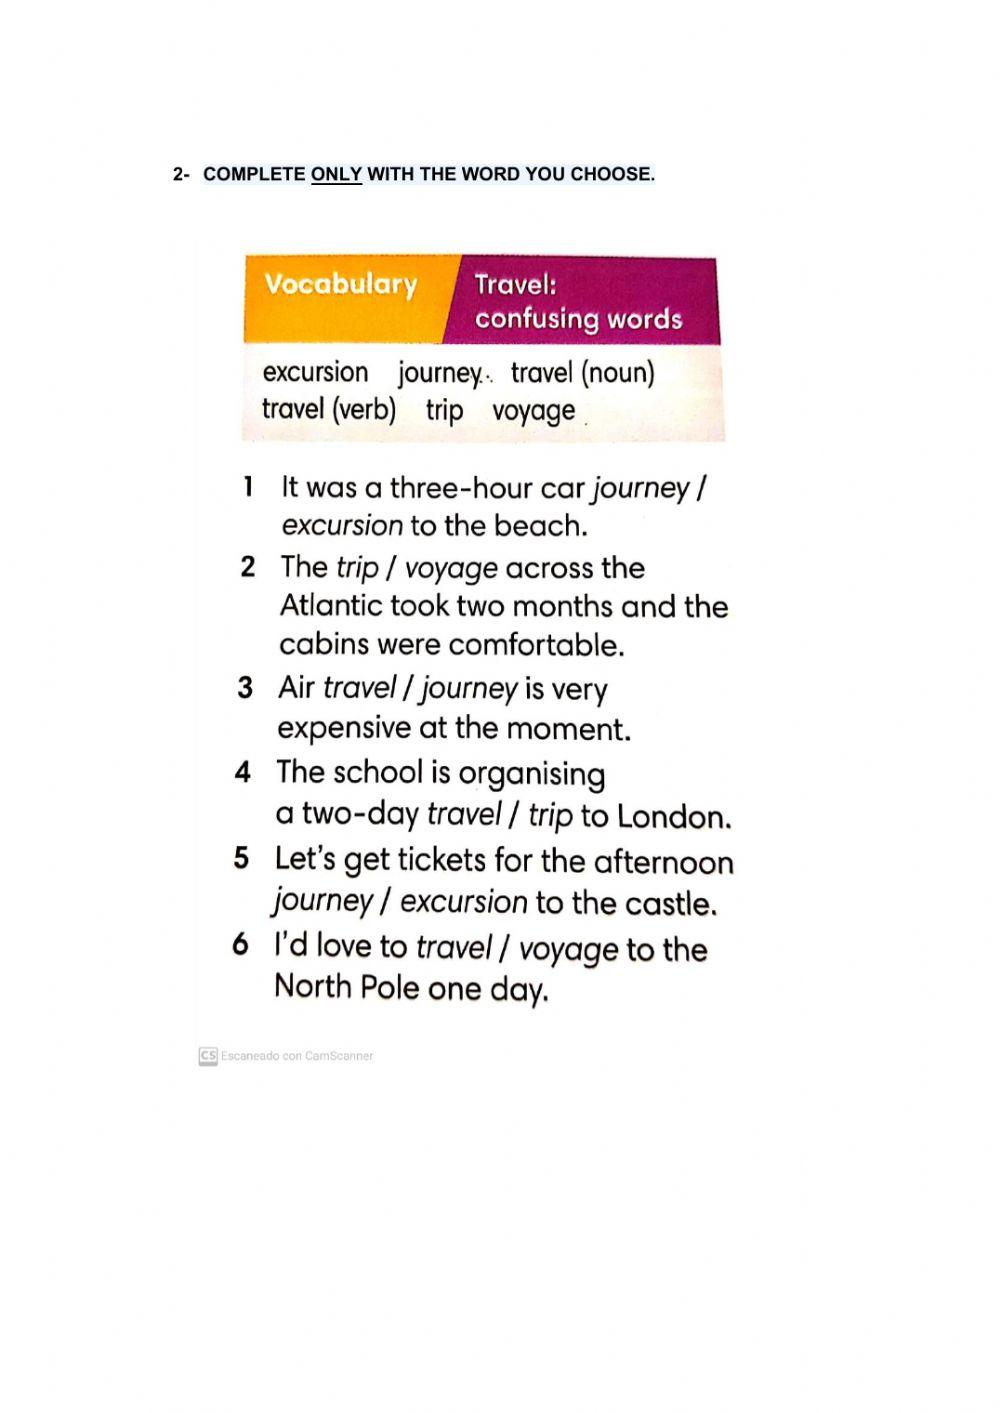 Travelling: confusing words